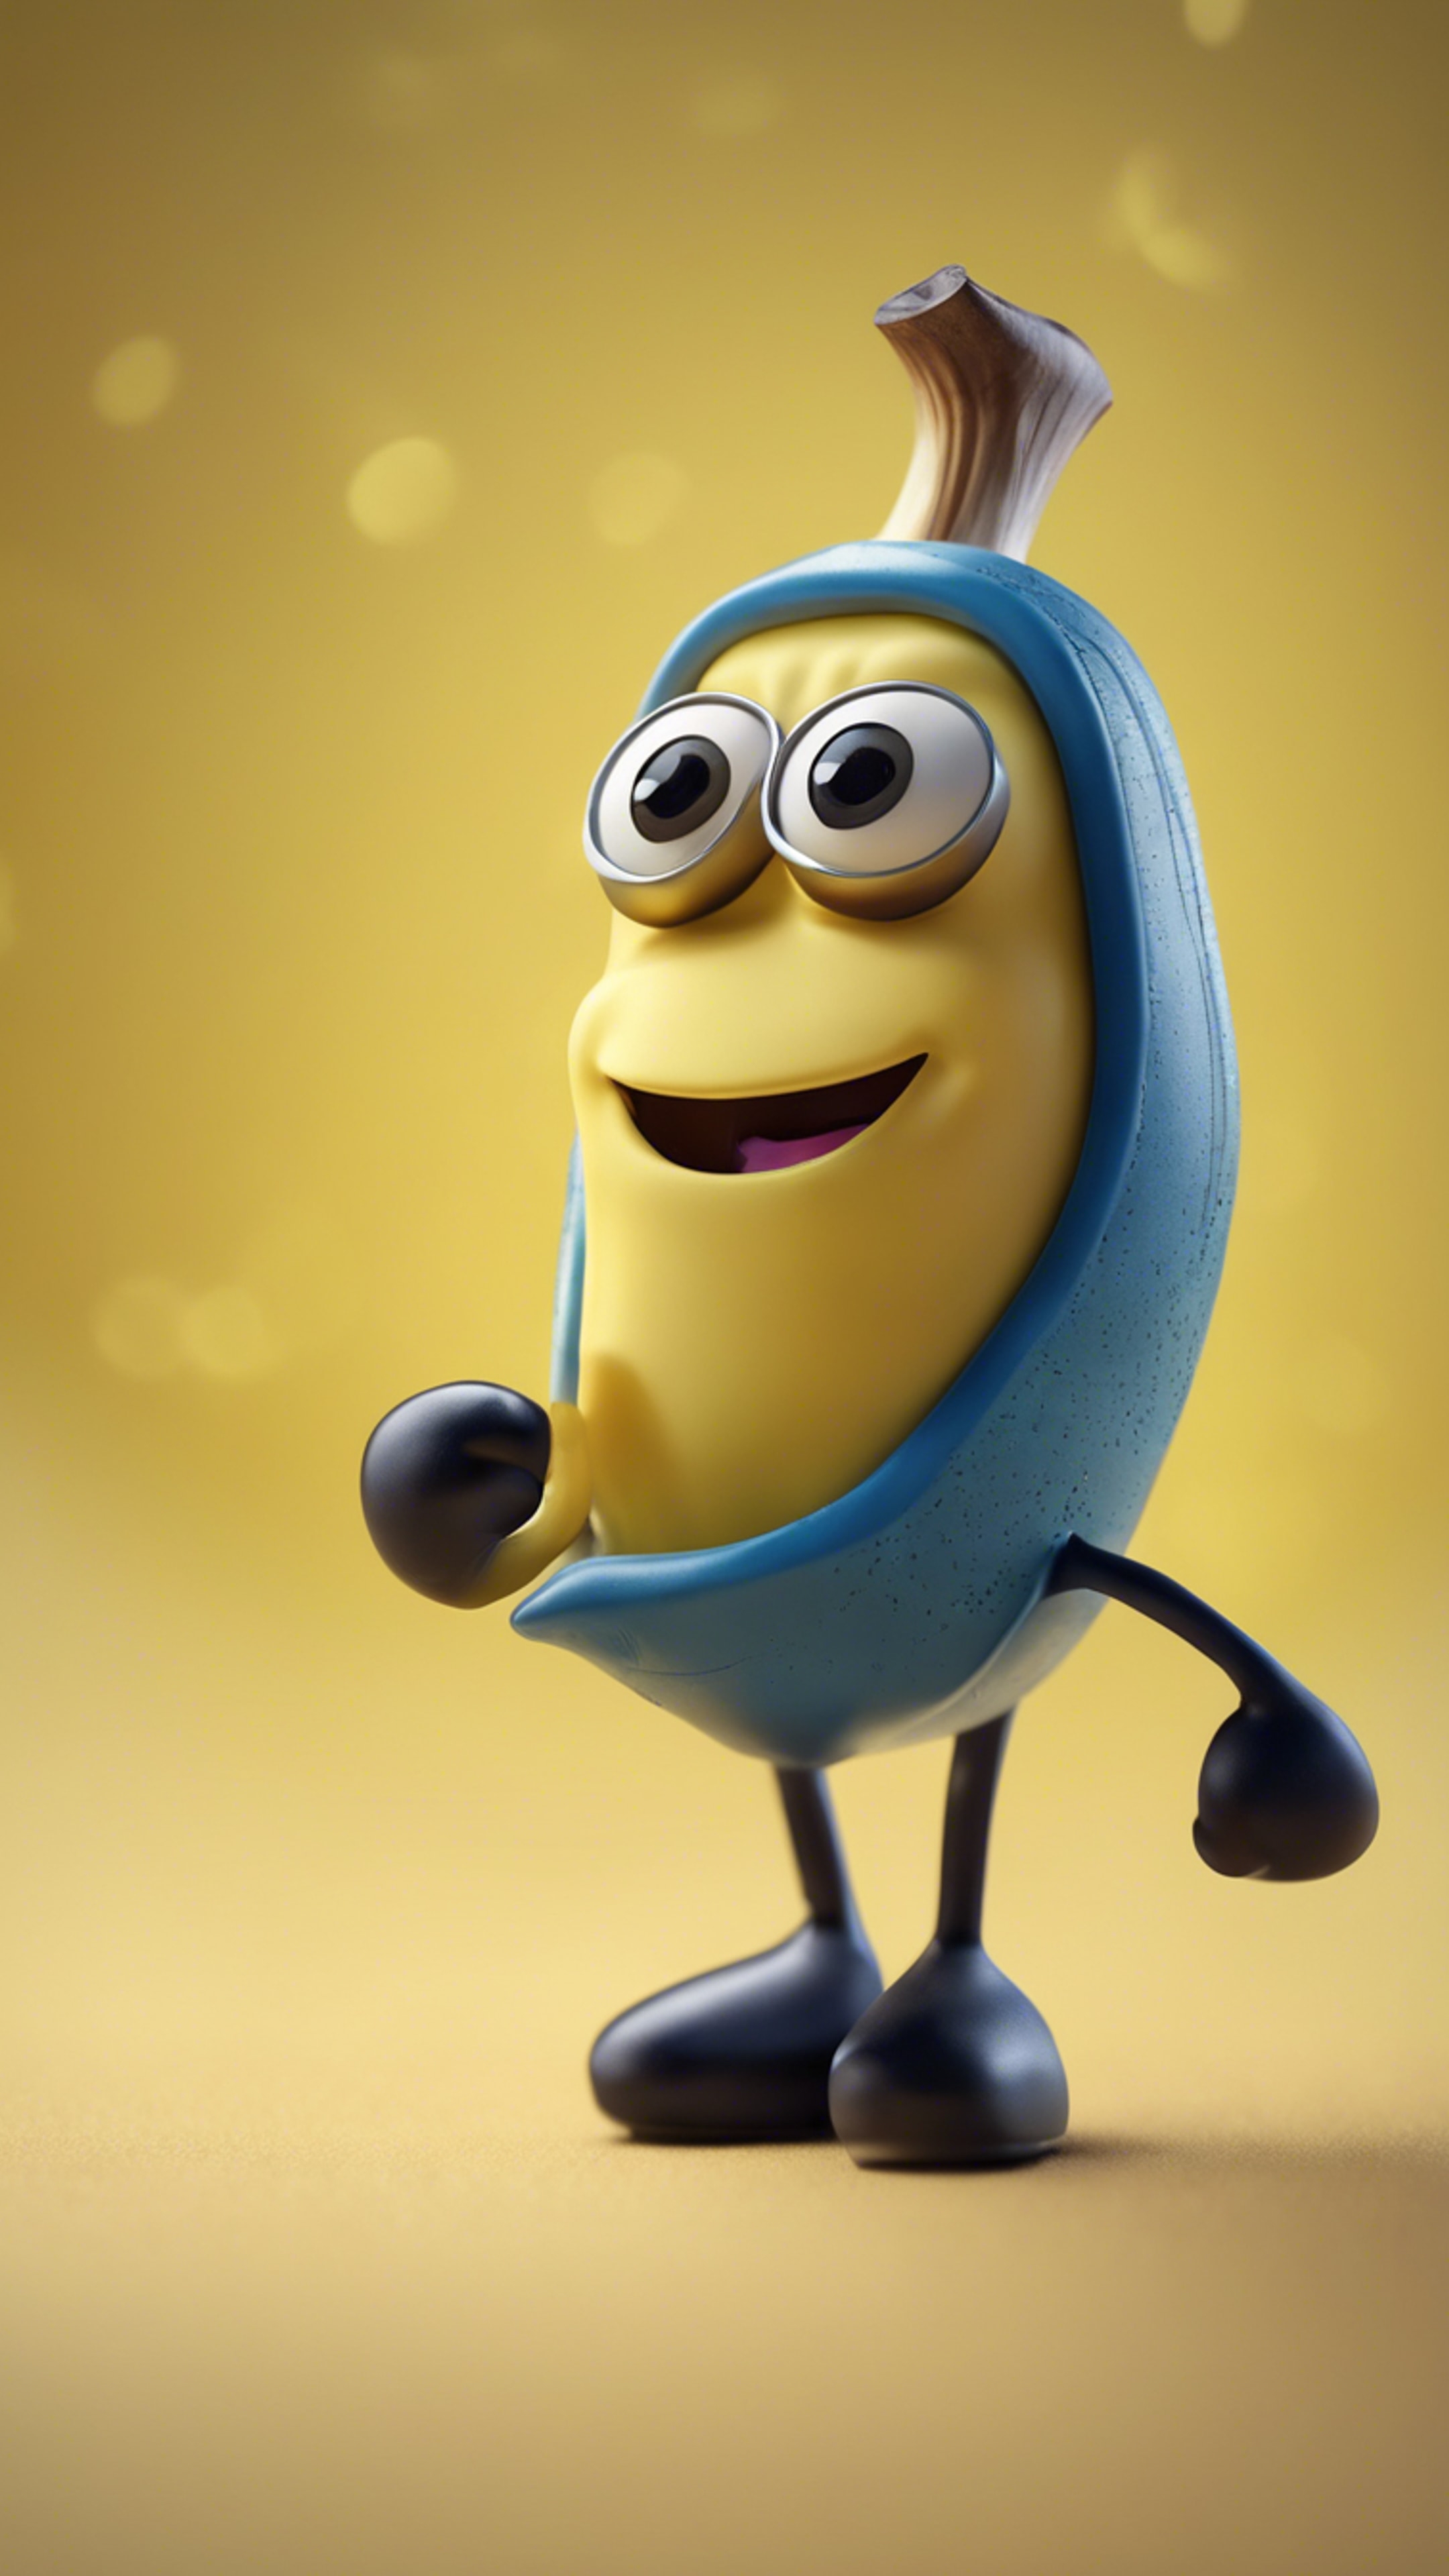 A banana animated character in a kids TV show. Wallpaper[134047b32d7e4822af7d]